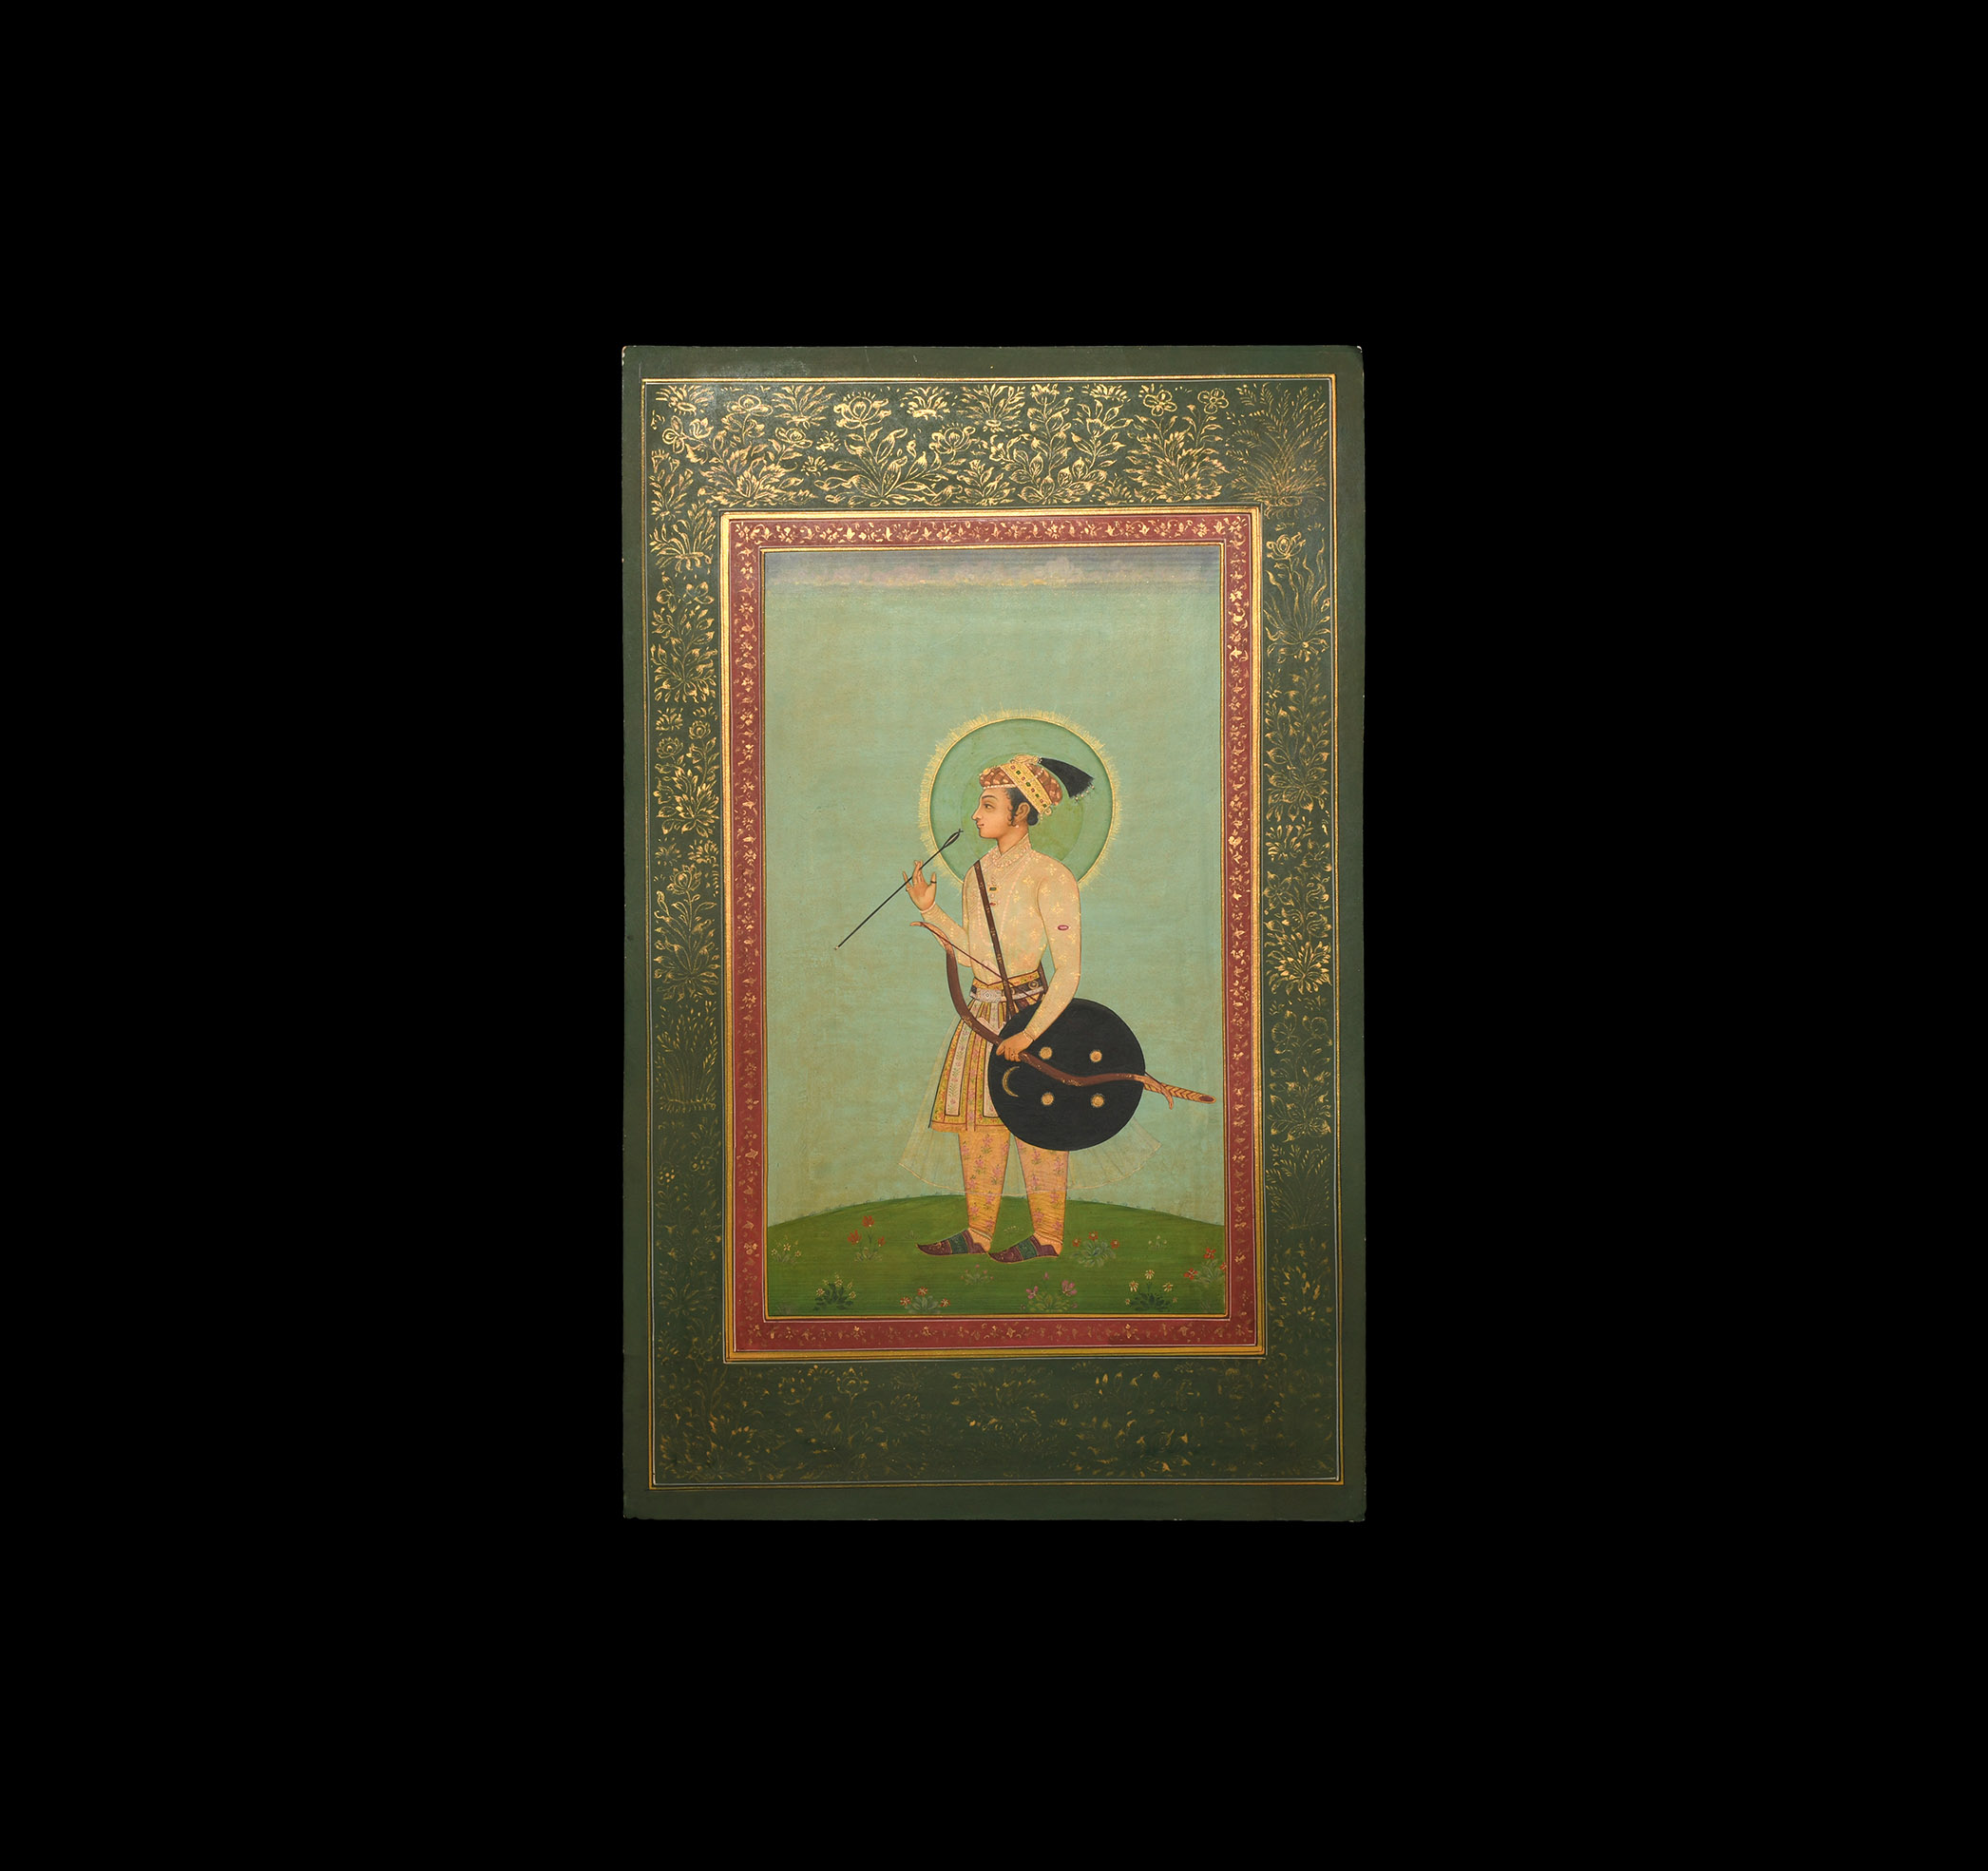 Indian Mughal Painting of a Young Prince Holding an Arrow